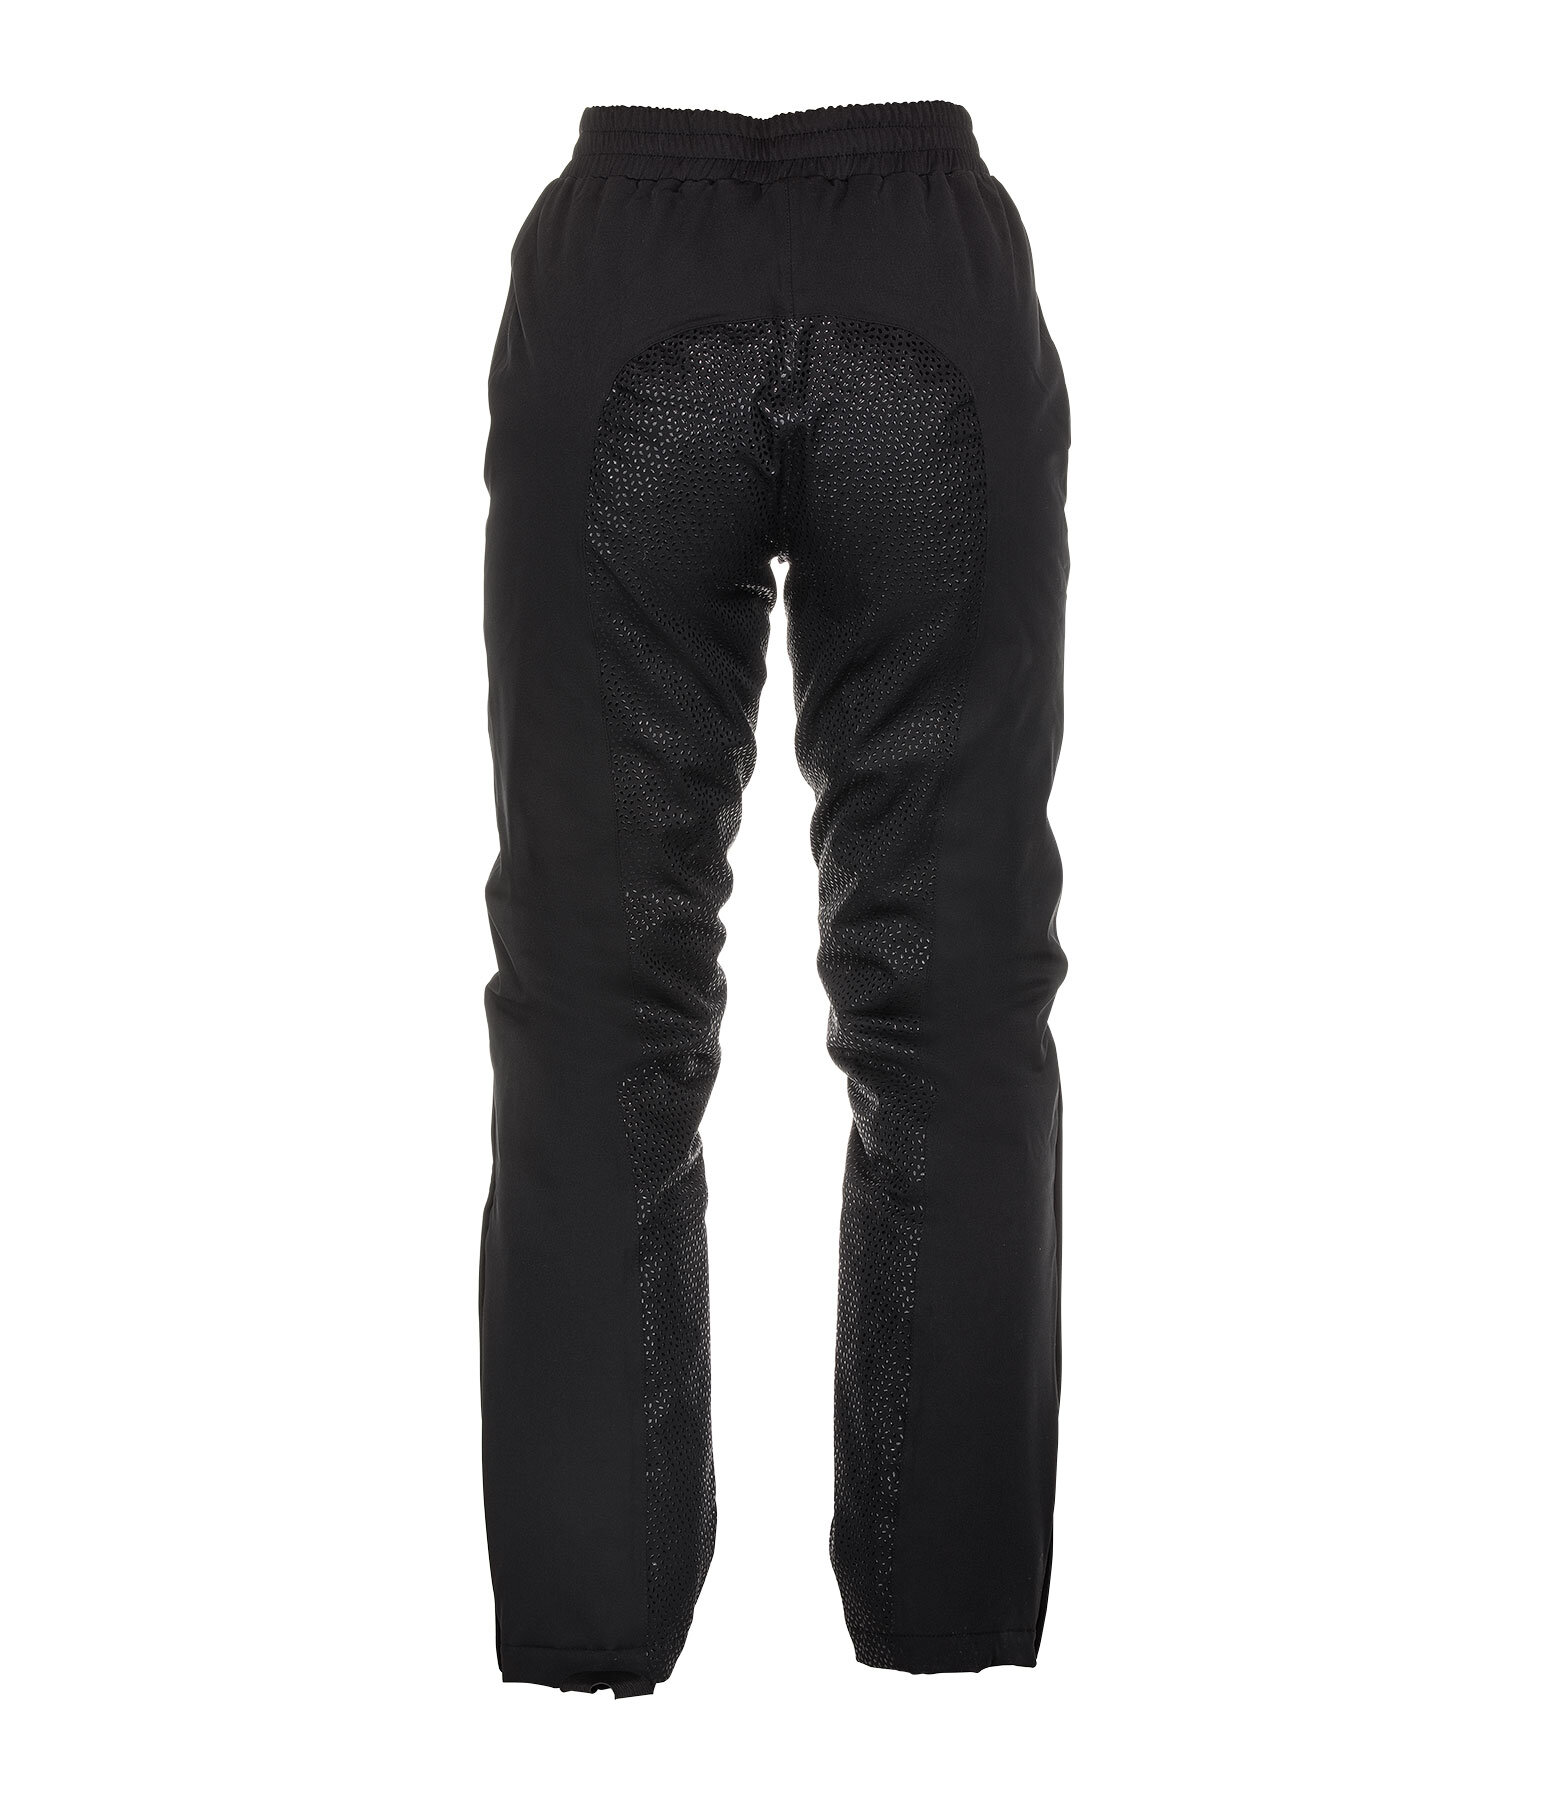 Children's Thermal Overtrousers.